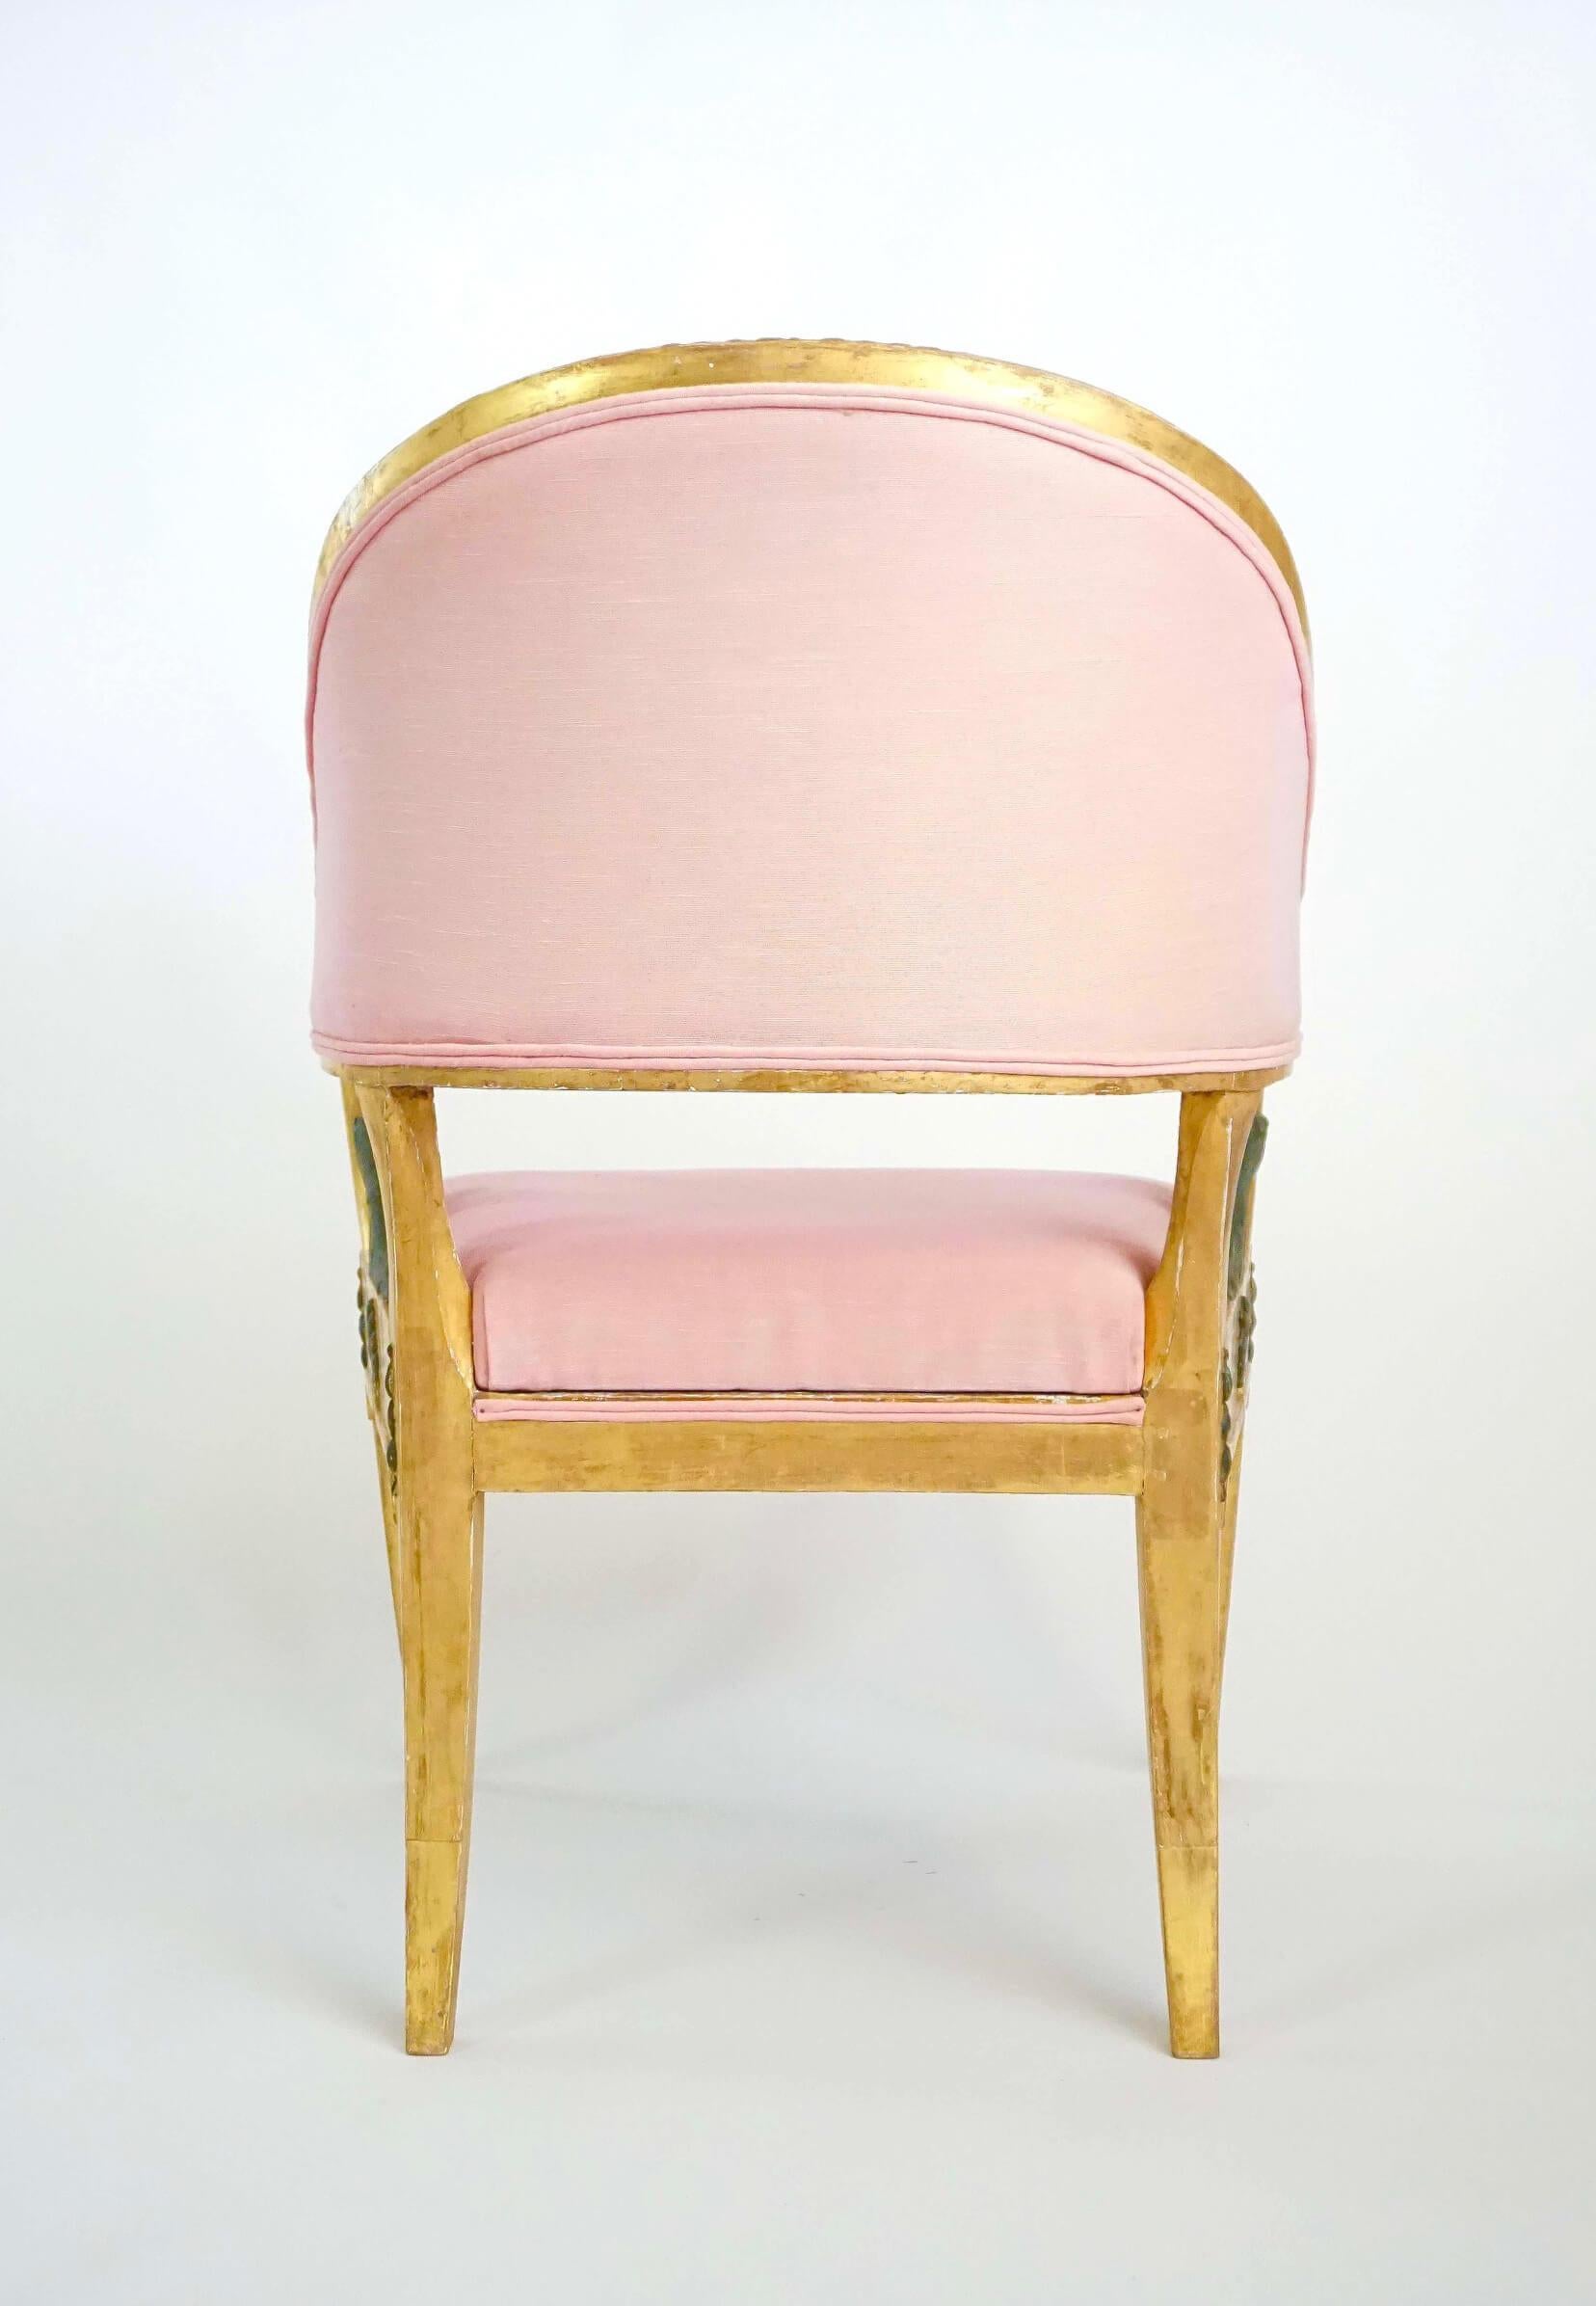 Upholstery Swedish Gustavian Neoclassical Giltwood Fauteuil by Ephraim Ståhl, circa 1800 For Sale